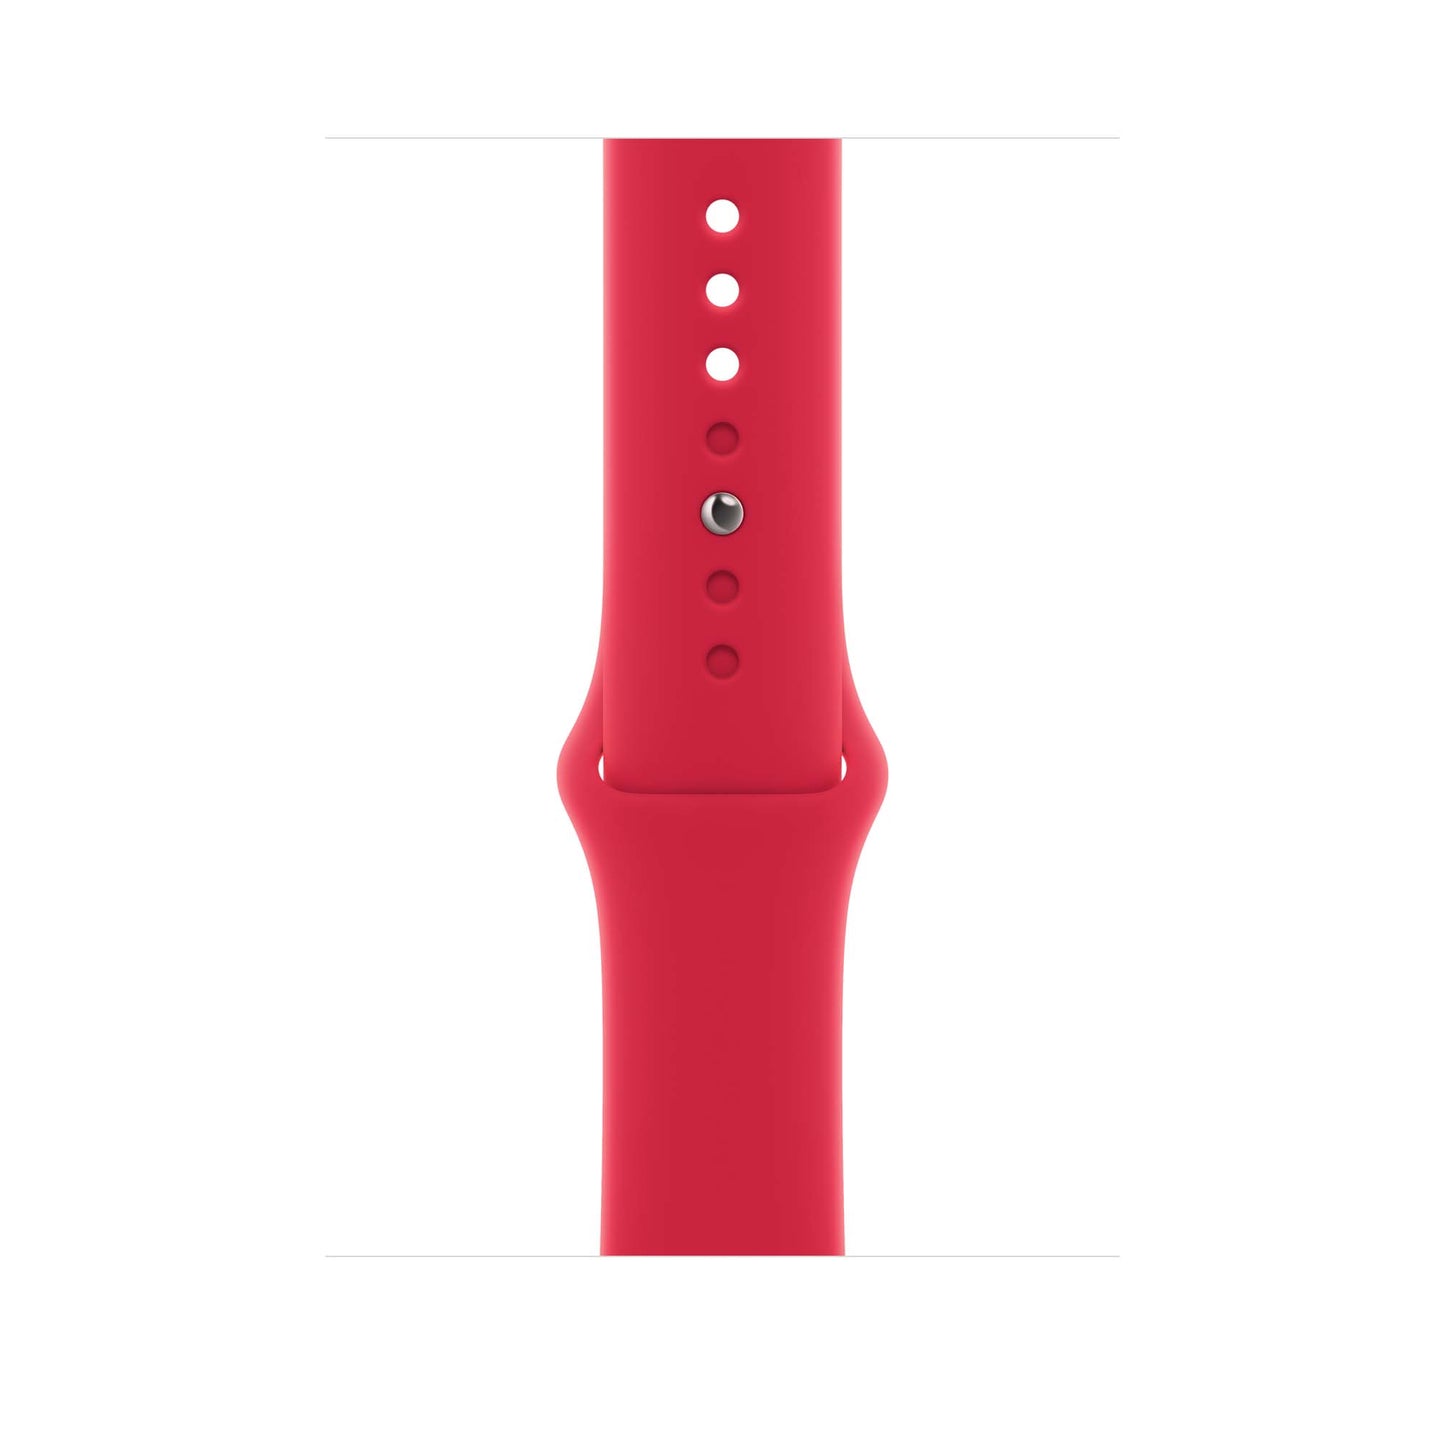 45mm (PRODUCT)RED Sport Band - Regular